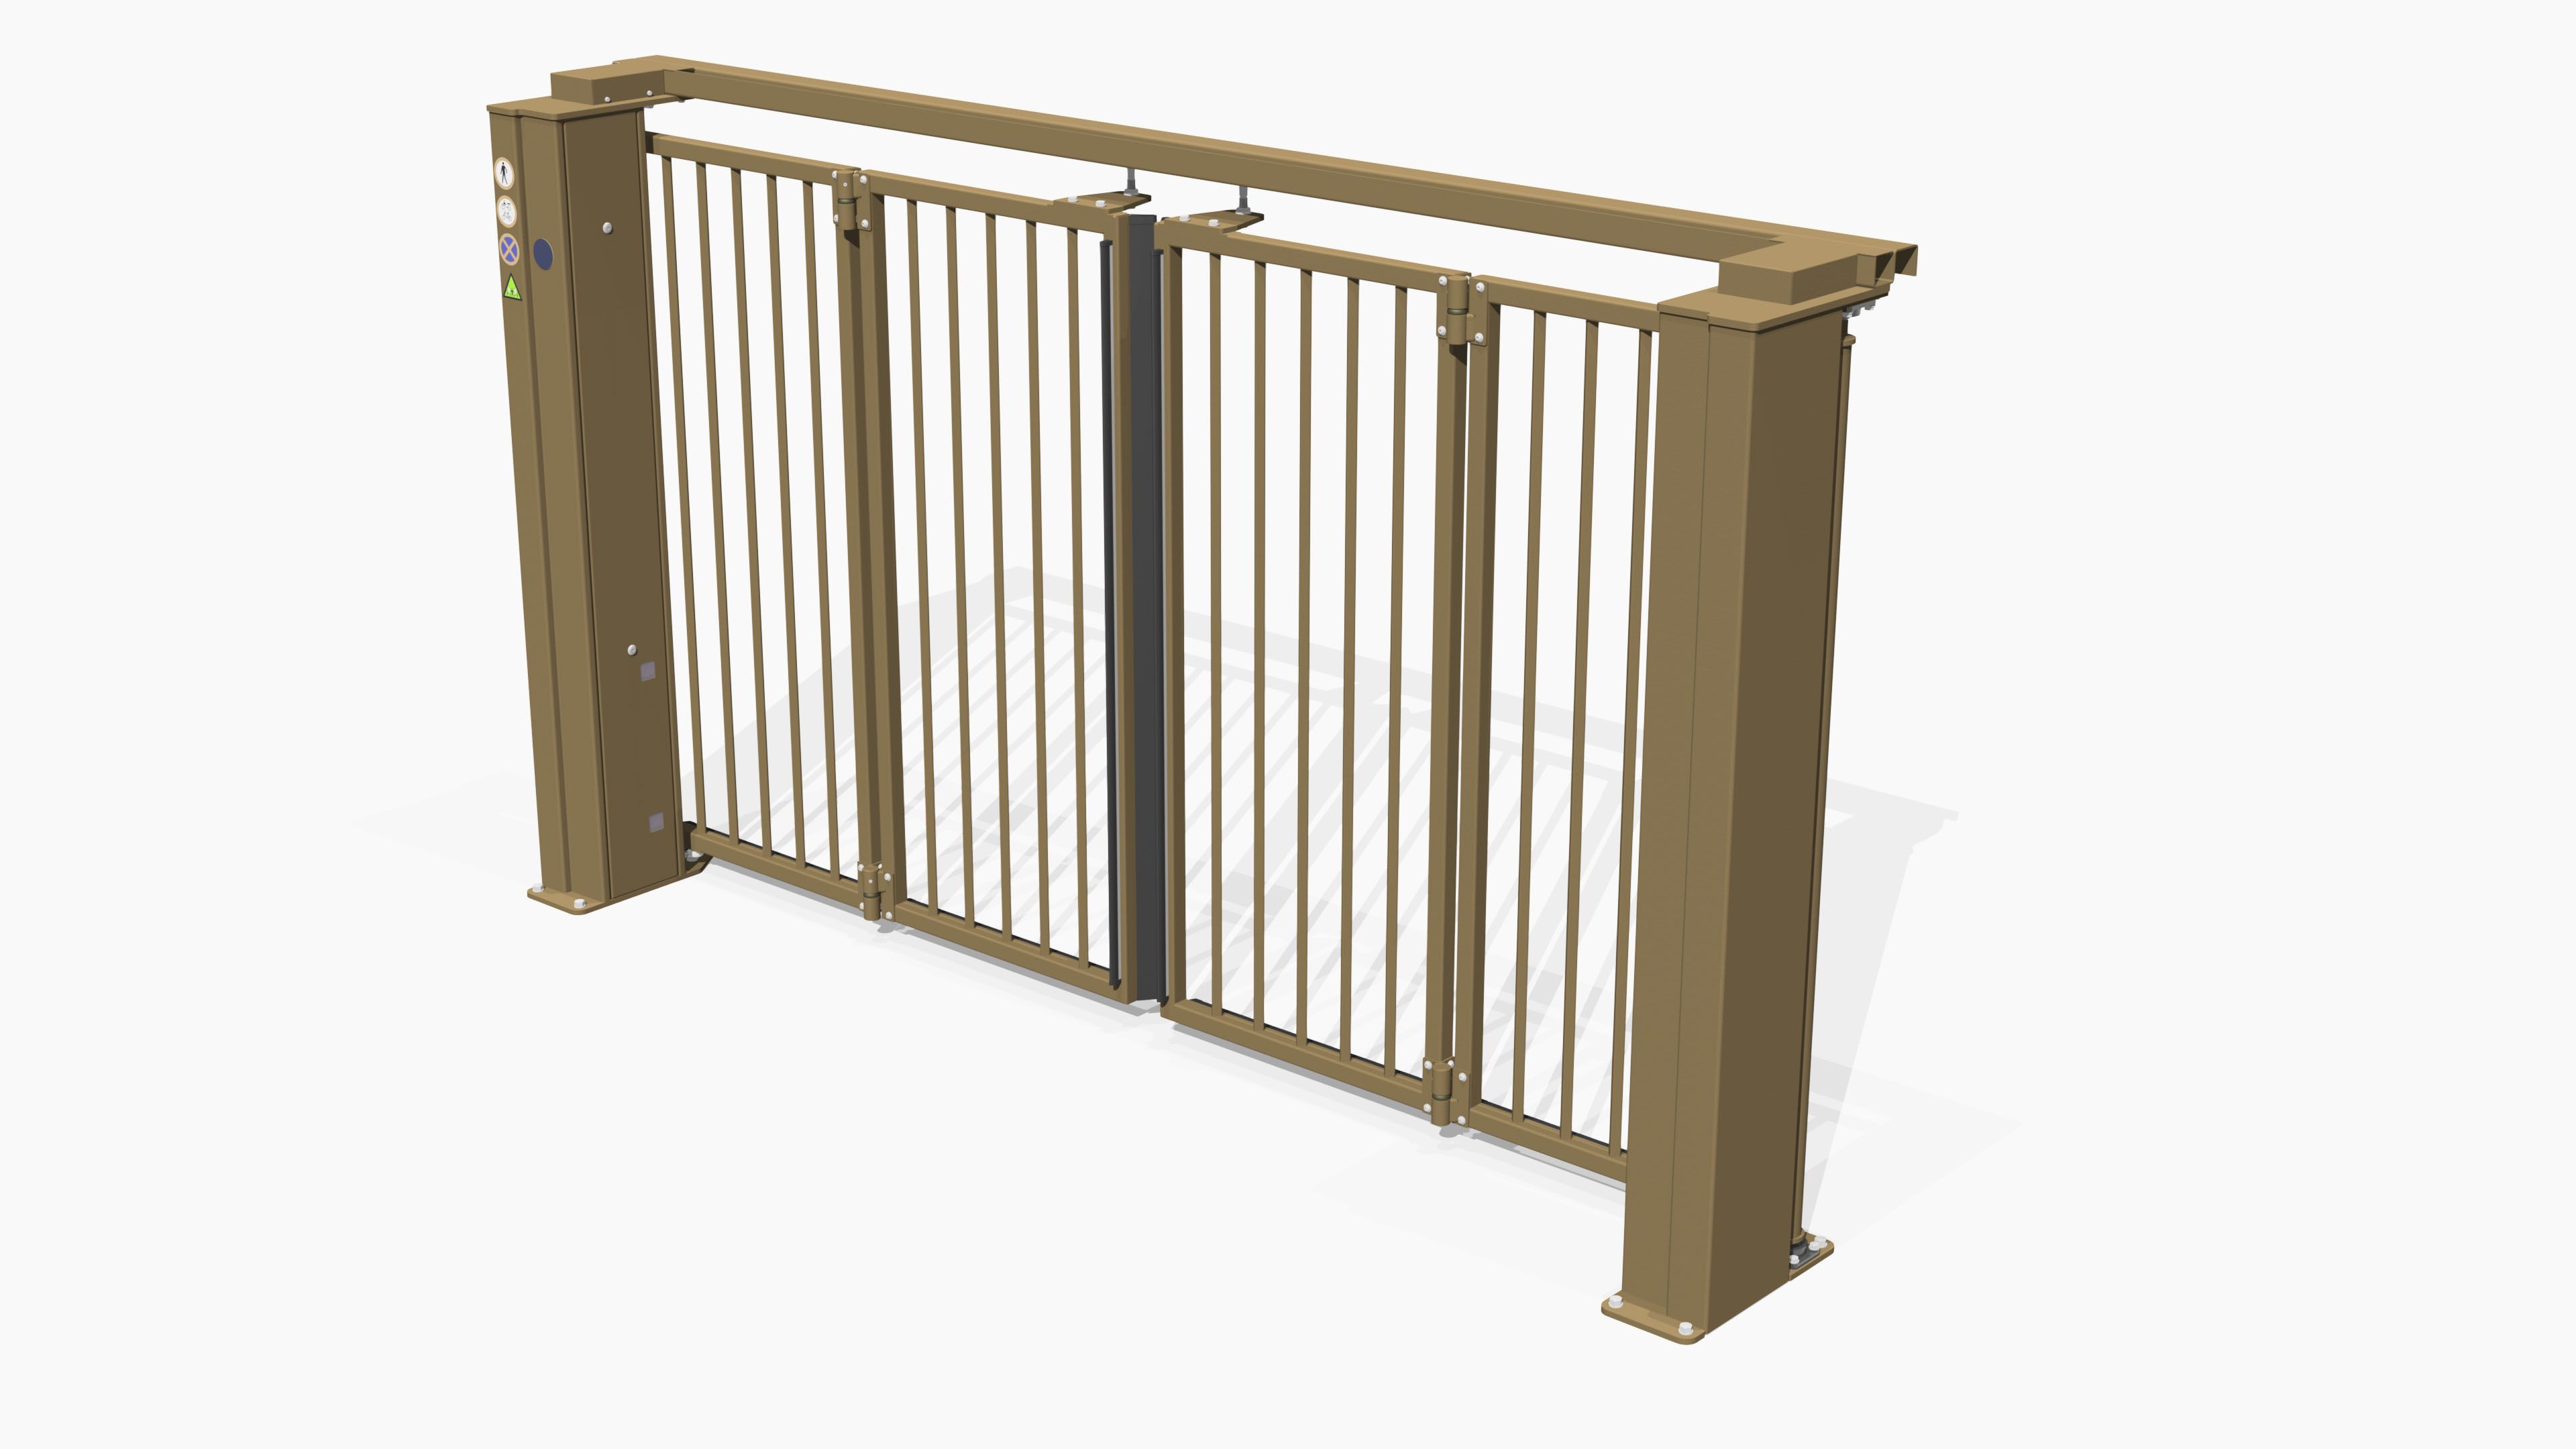 Bavak has been supplying speed gates for virtually every need for years